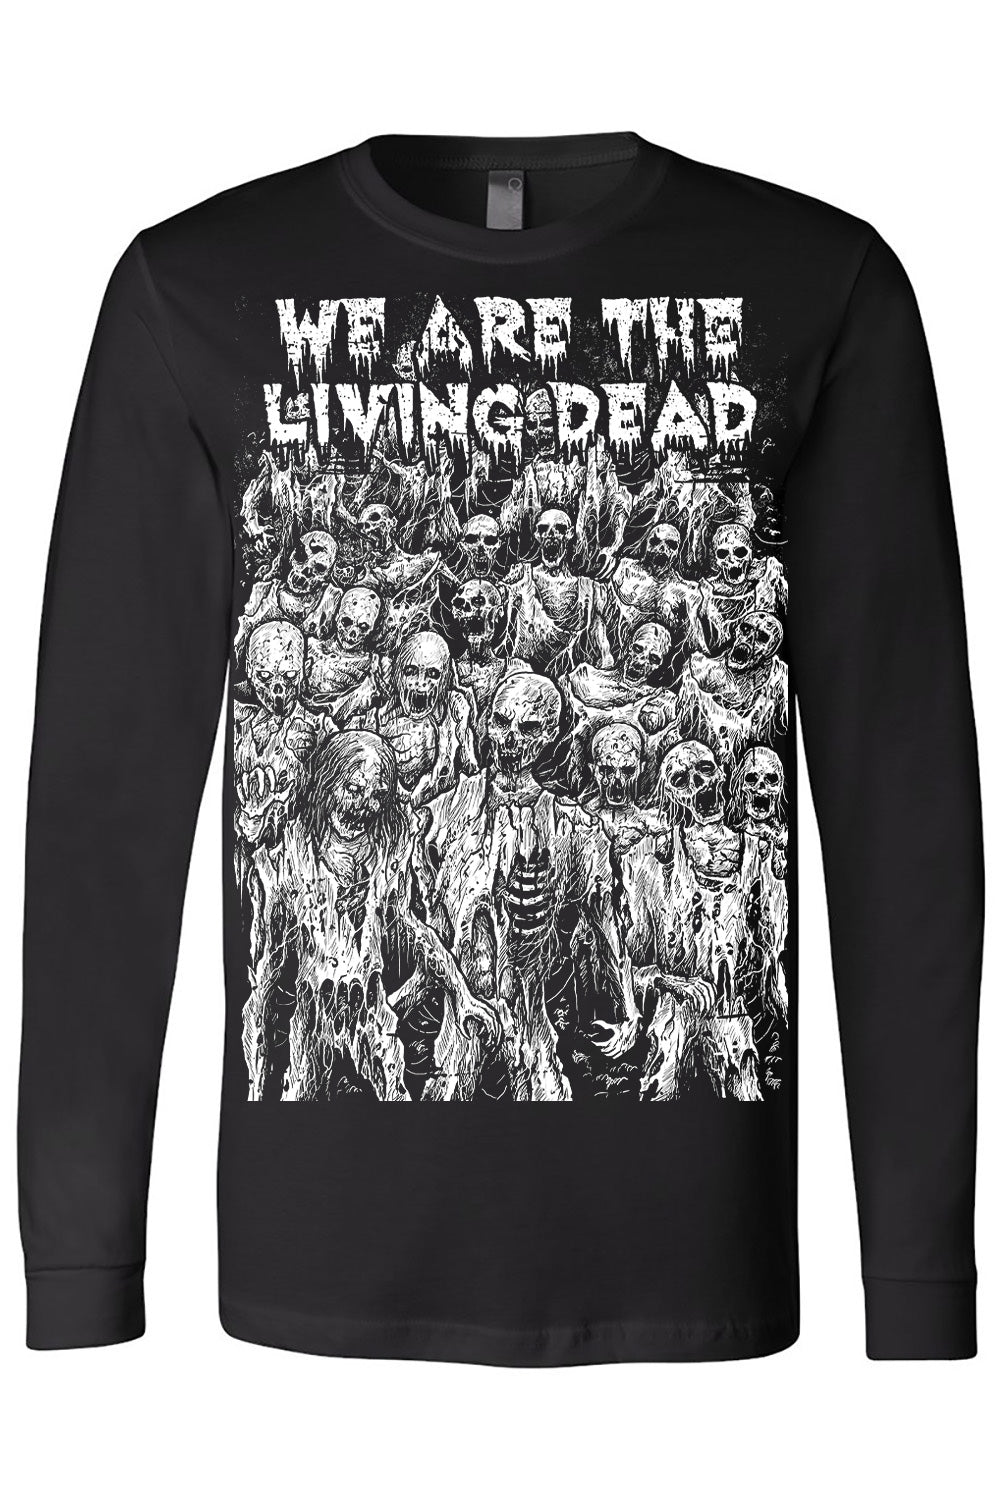 Living Dead Zombies Tee [Multiple Styles Available]